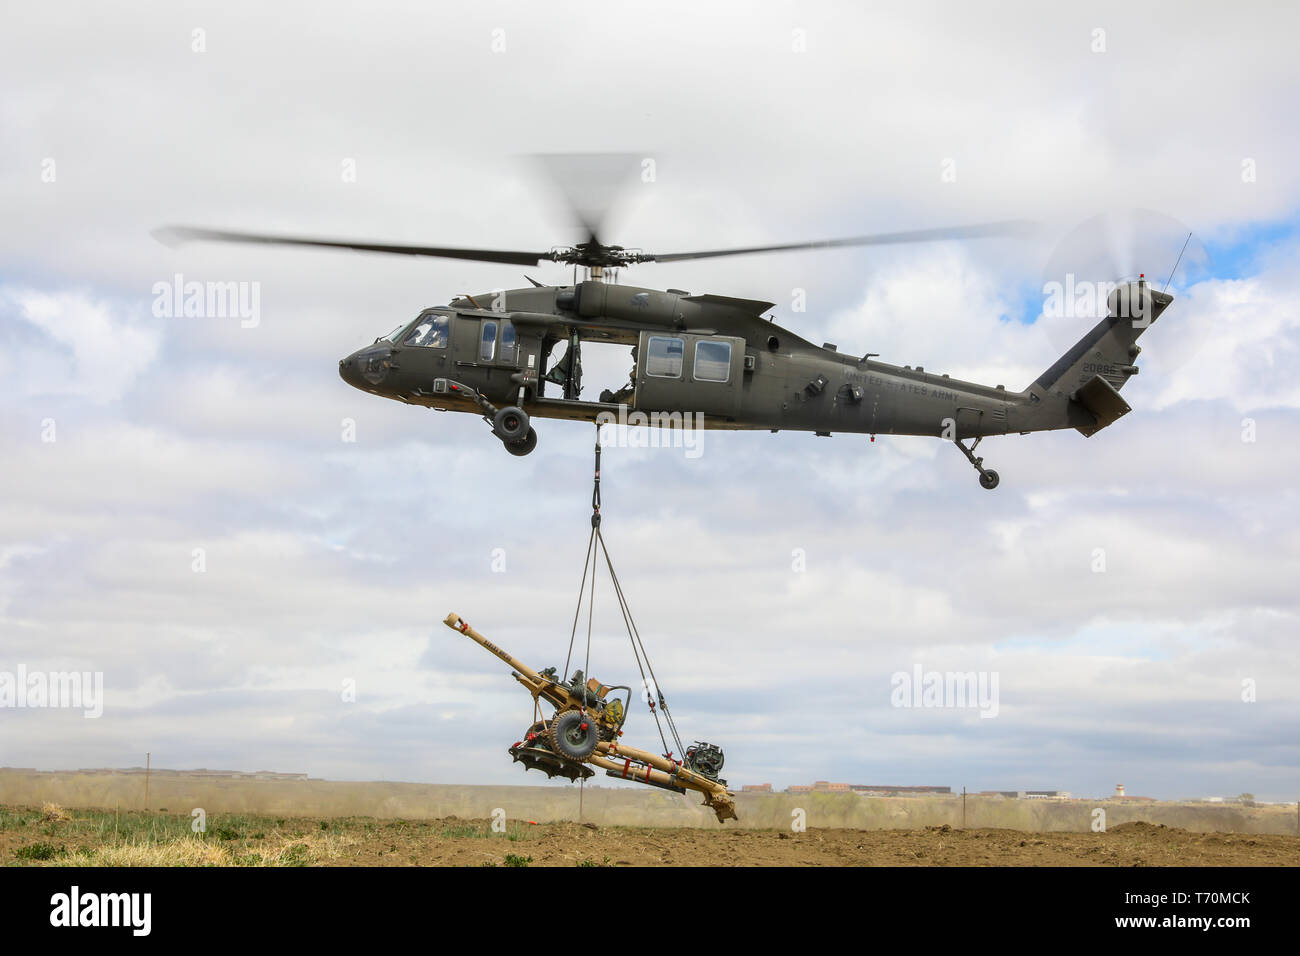 A UH-60 Black Hawk, piloted by members of the 4th Combat Aviation Brigade, 4th Infantry Division, picks up a M119 Howitzer, May 2, 2019, during air assault training with Soldiers Bravo Battery, 2nd Battalion, 77th Field Artillery Regiment, 2nd Infantry Brigade Combat Team, 4th Inf. Div., on Fort Carson, Colorado. (U.S. Army photo by Staff Sgt. Neysa Canfield) Stock Photo